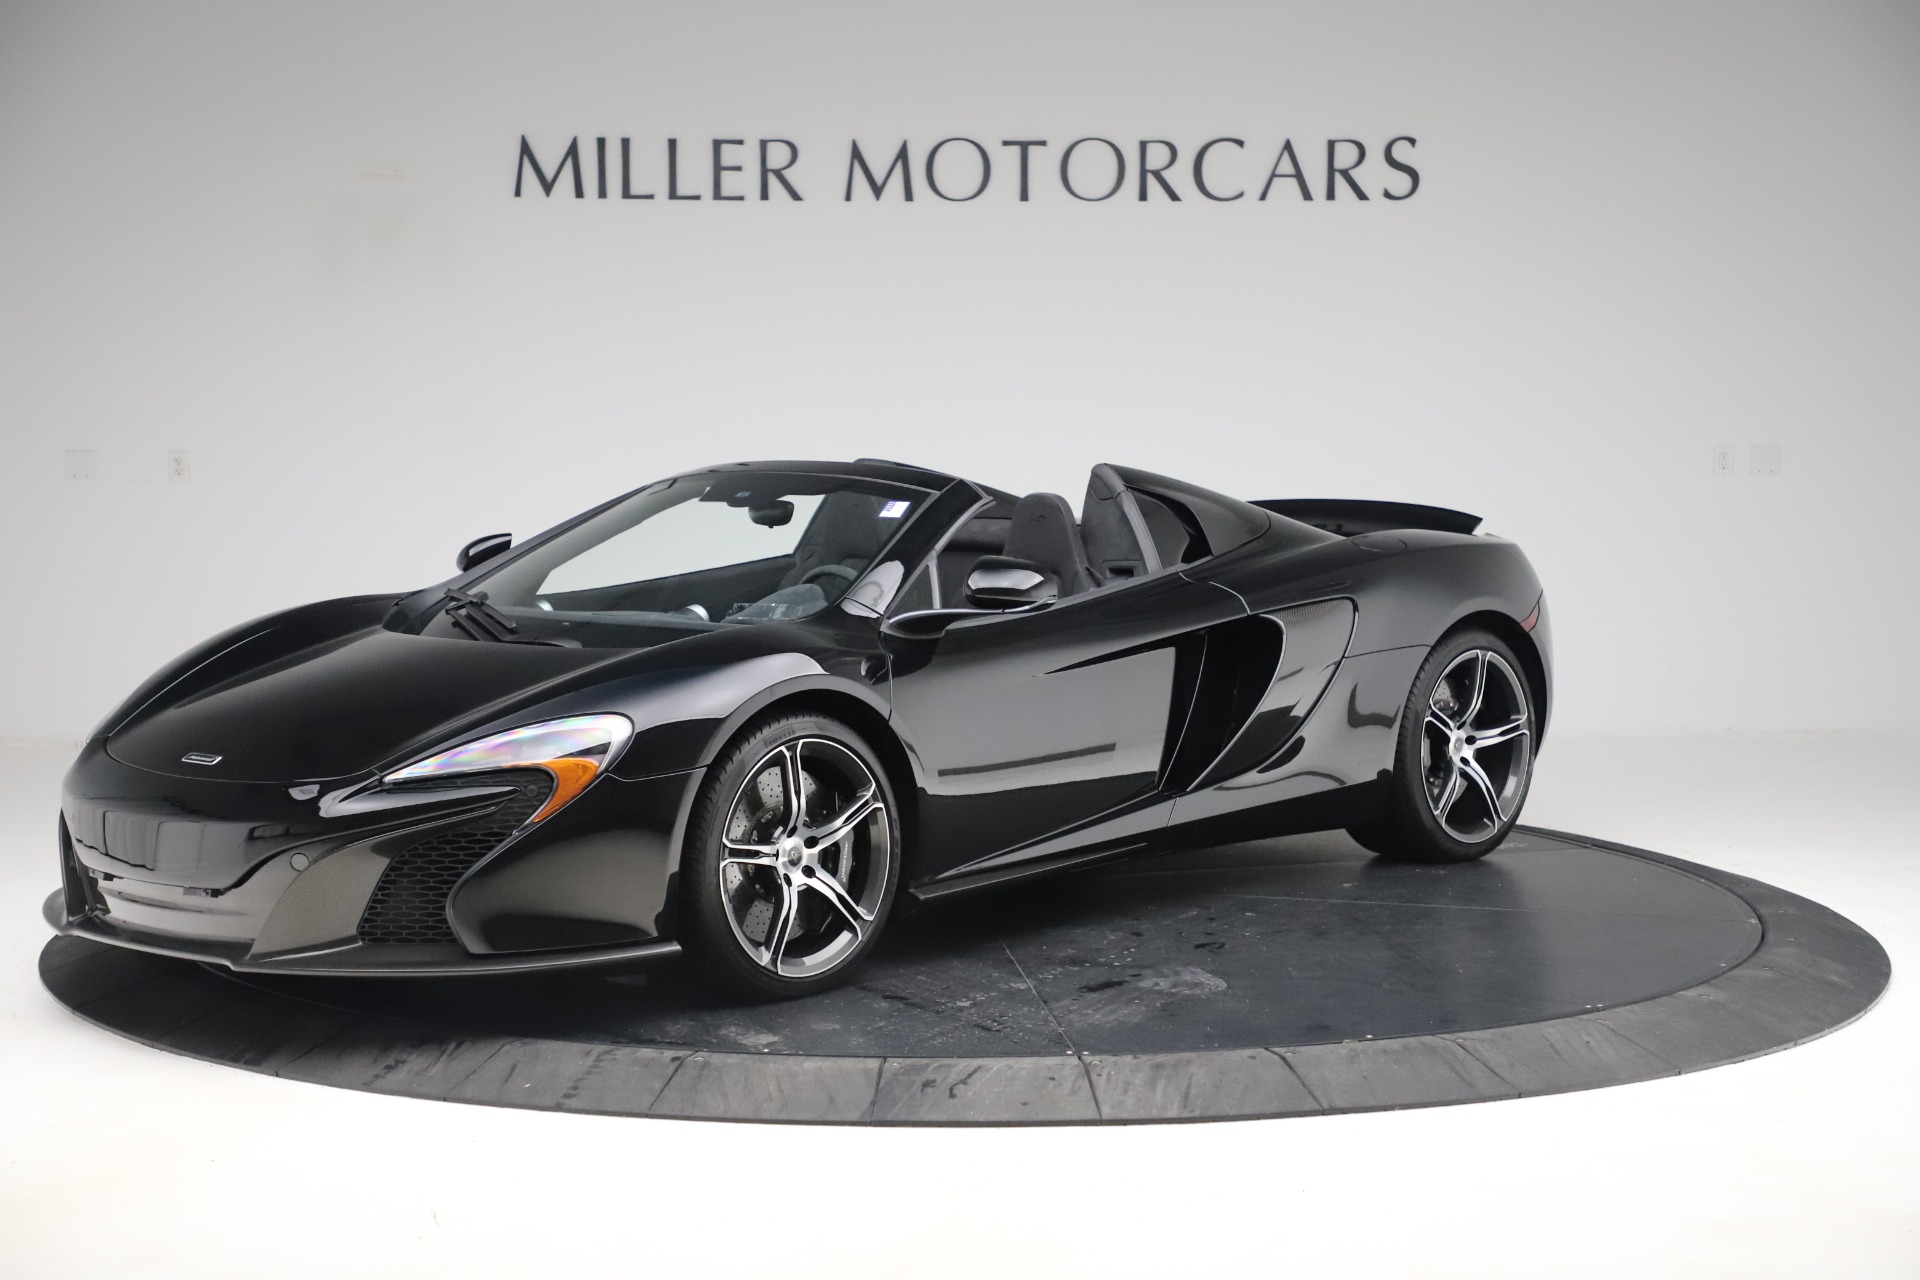 Used 2015 McLaren 650S Spider for sale Sold at Bugatti of Greenwich in Greenwich CT 06830 1